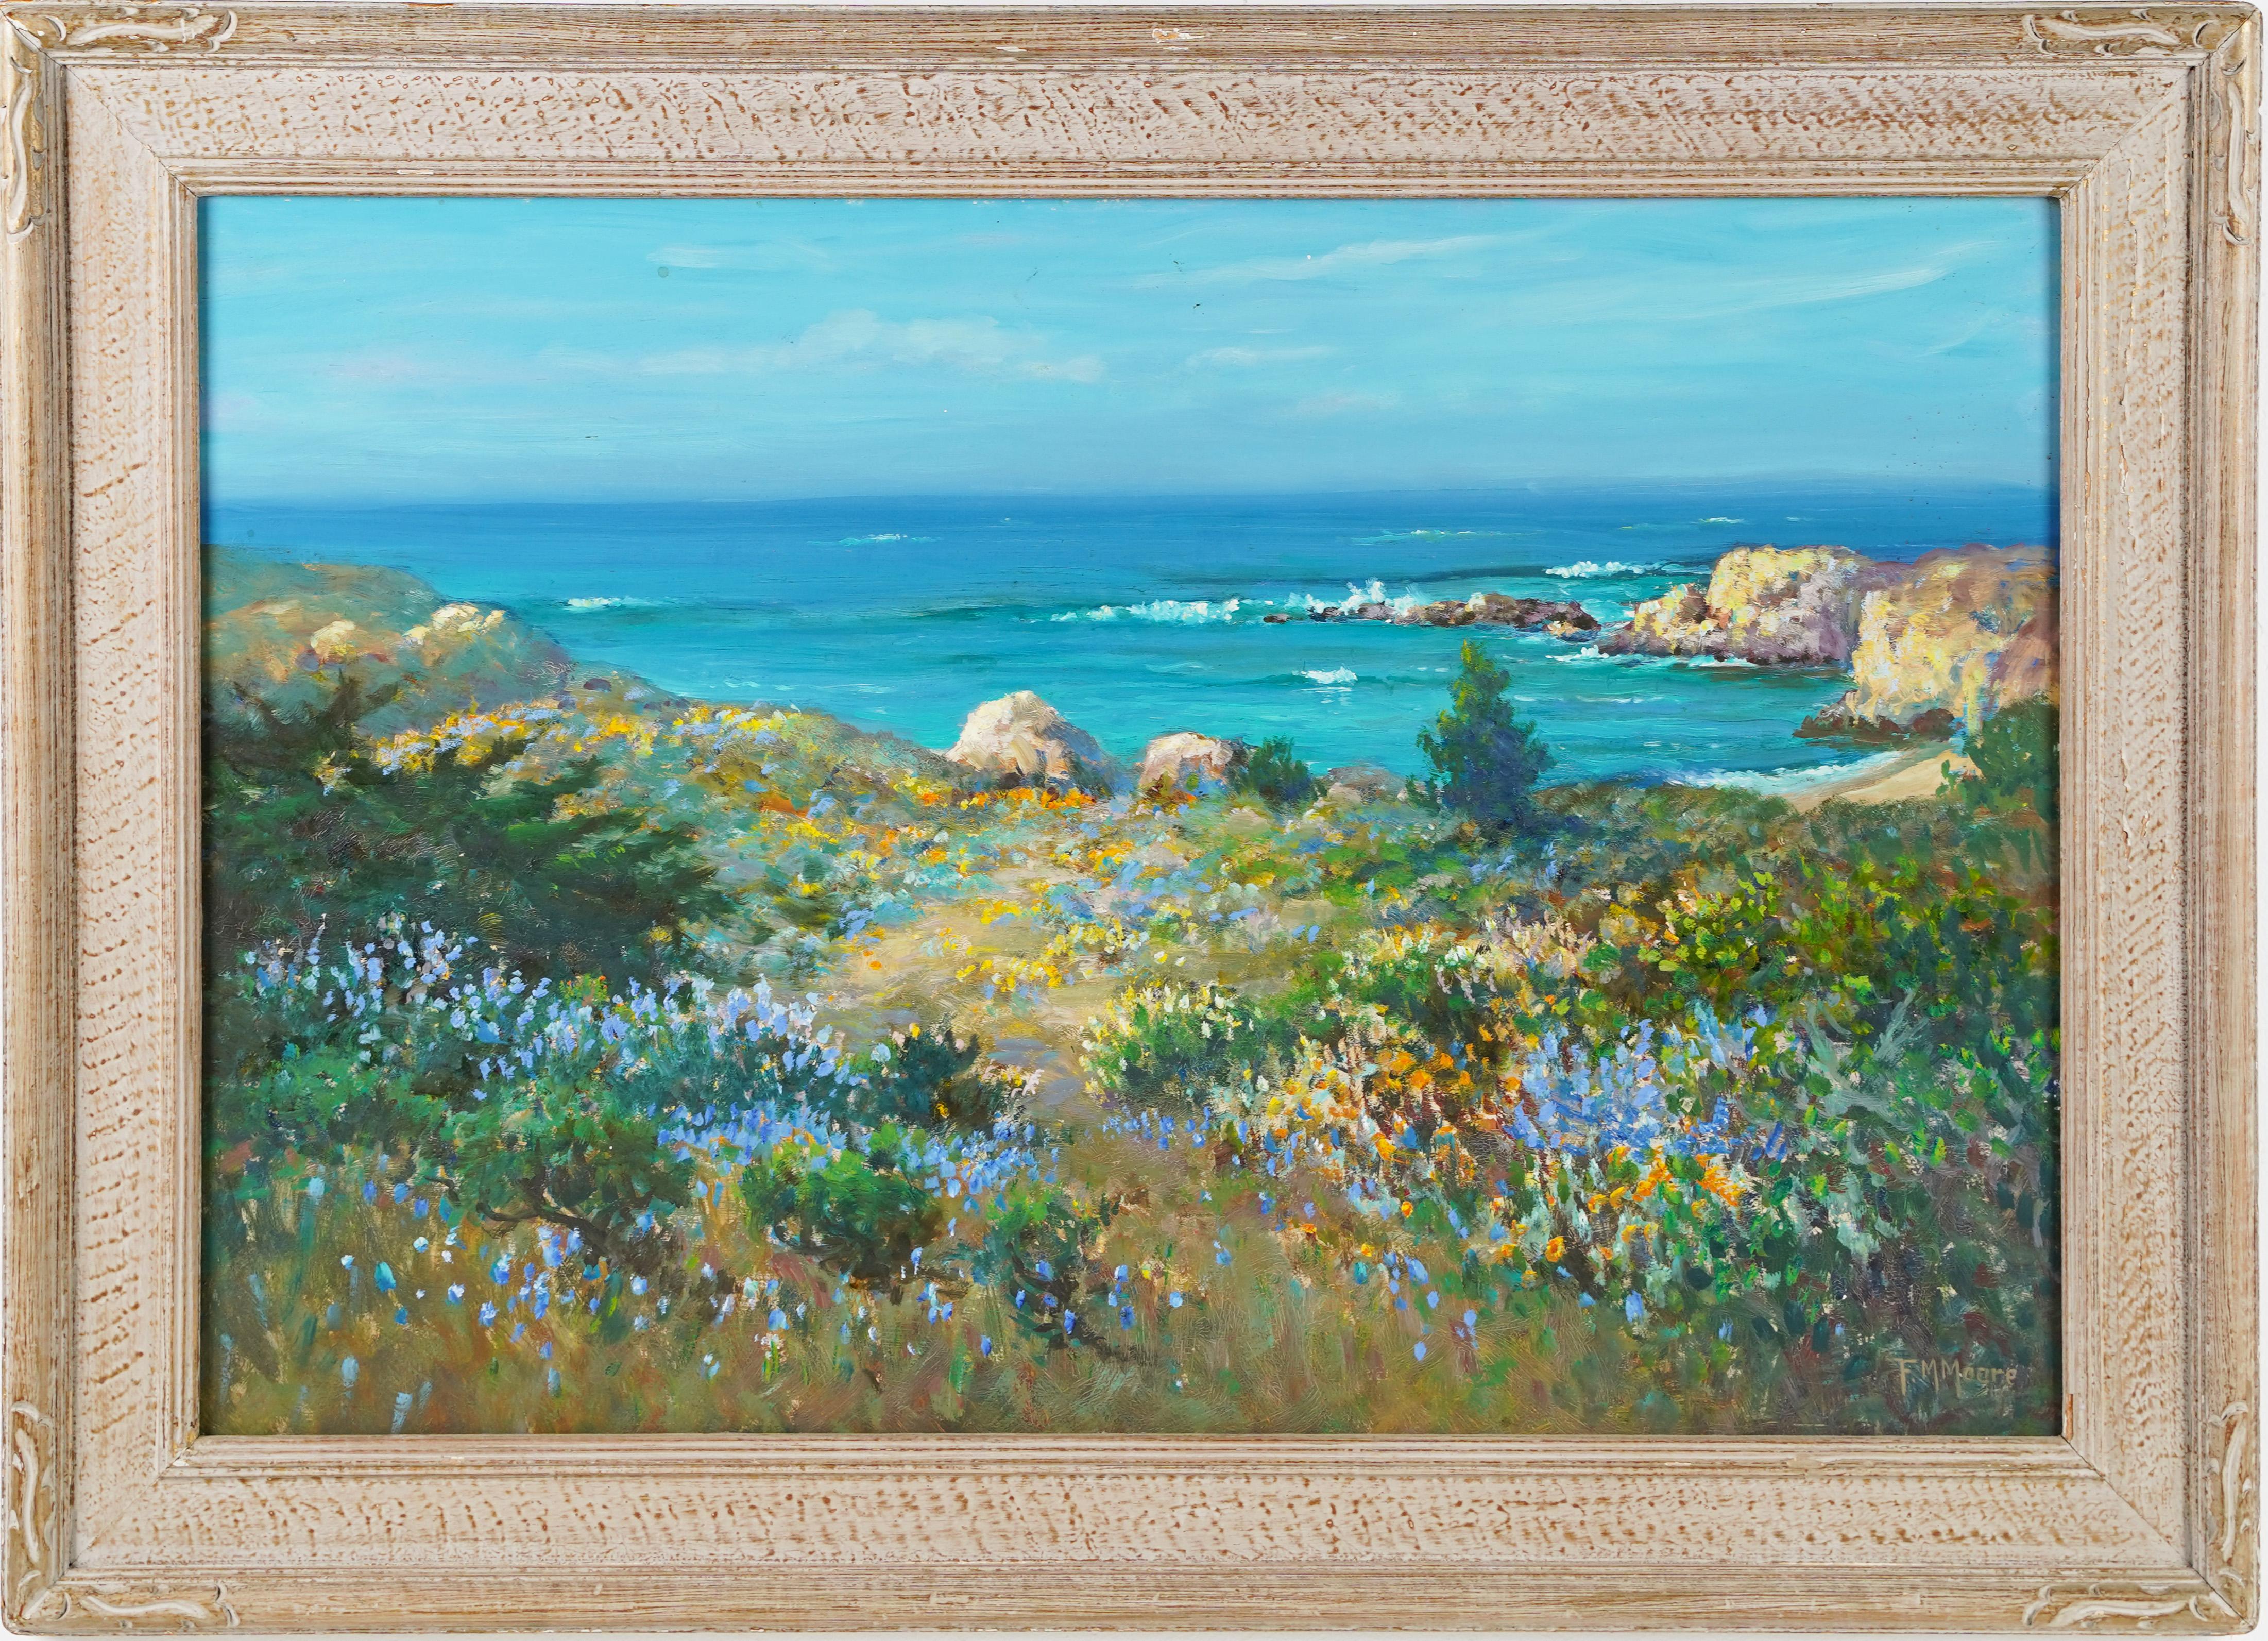 Frank Montague Moore Landscape Painting - "Morning Calm" California Coast Beach Seascape Impressionist Framed Oil Painting